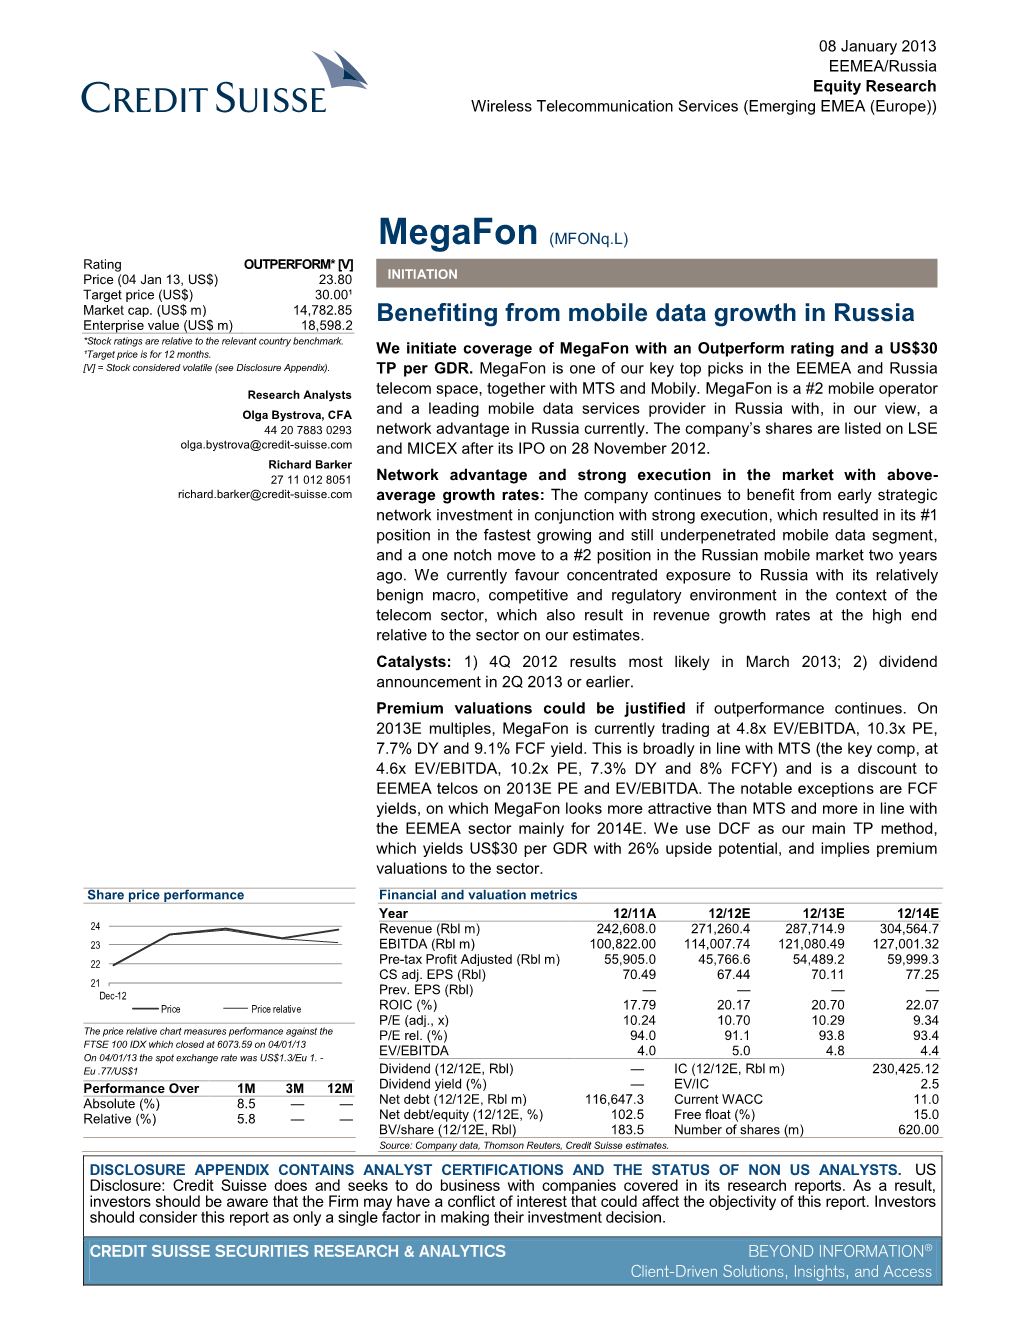 Megafon: Benefiting from Data Growth in Russia